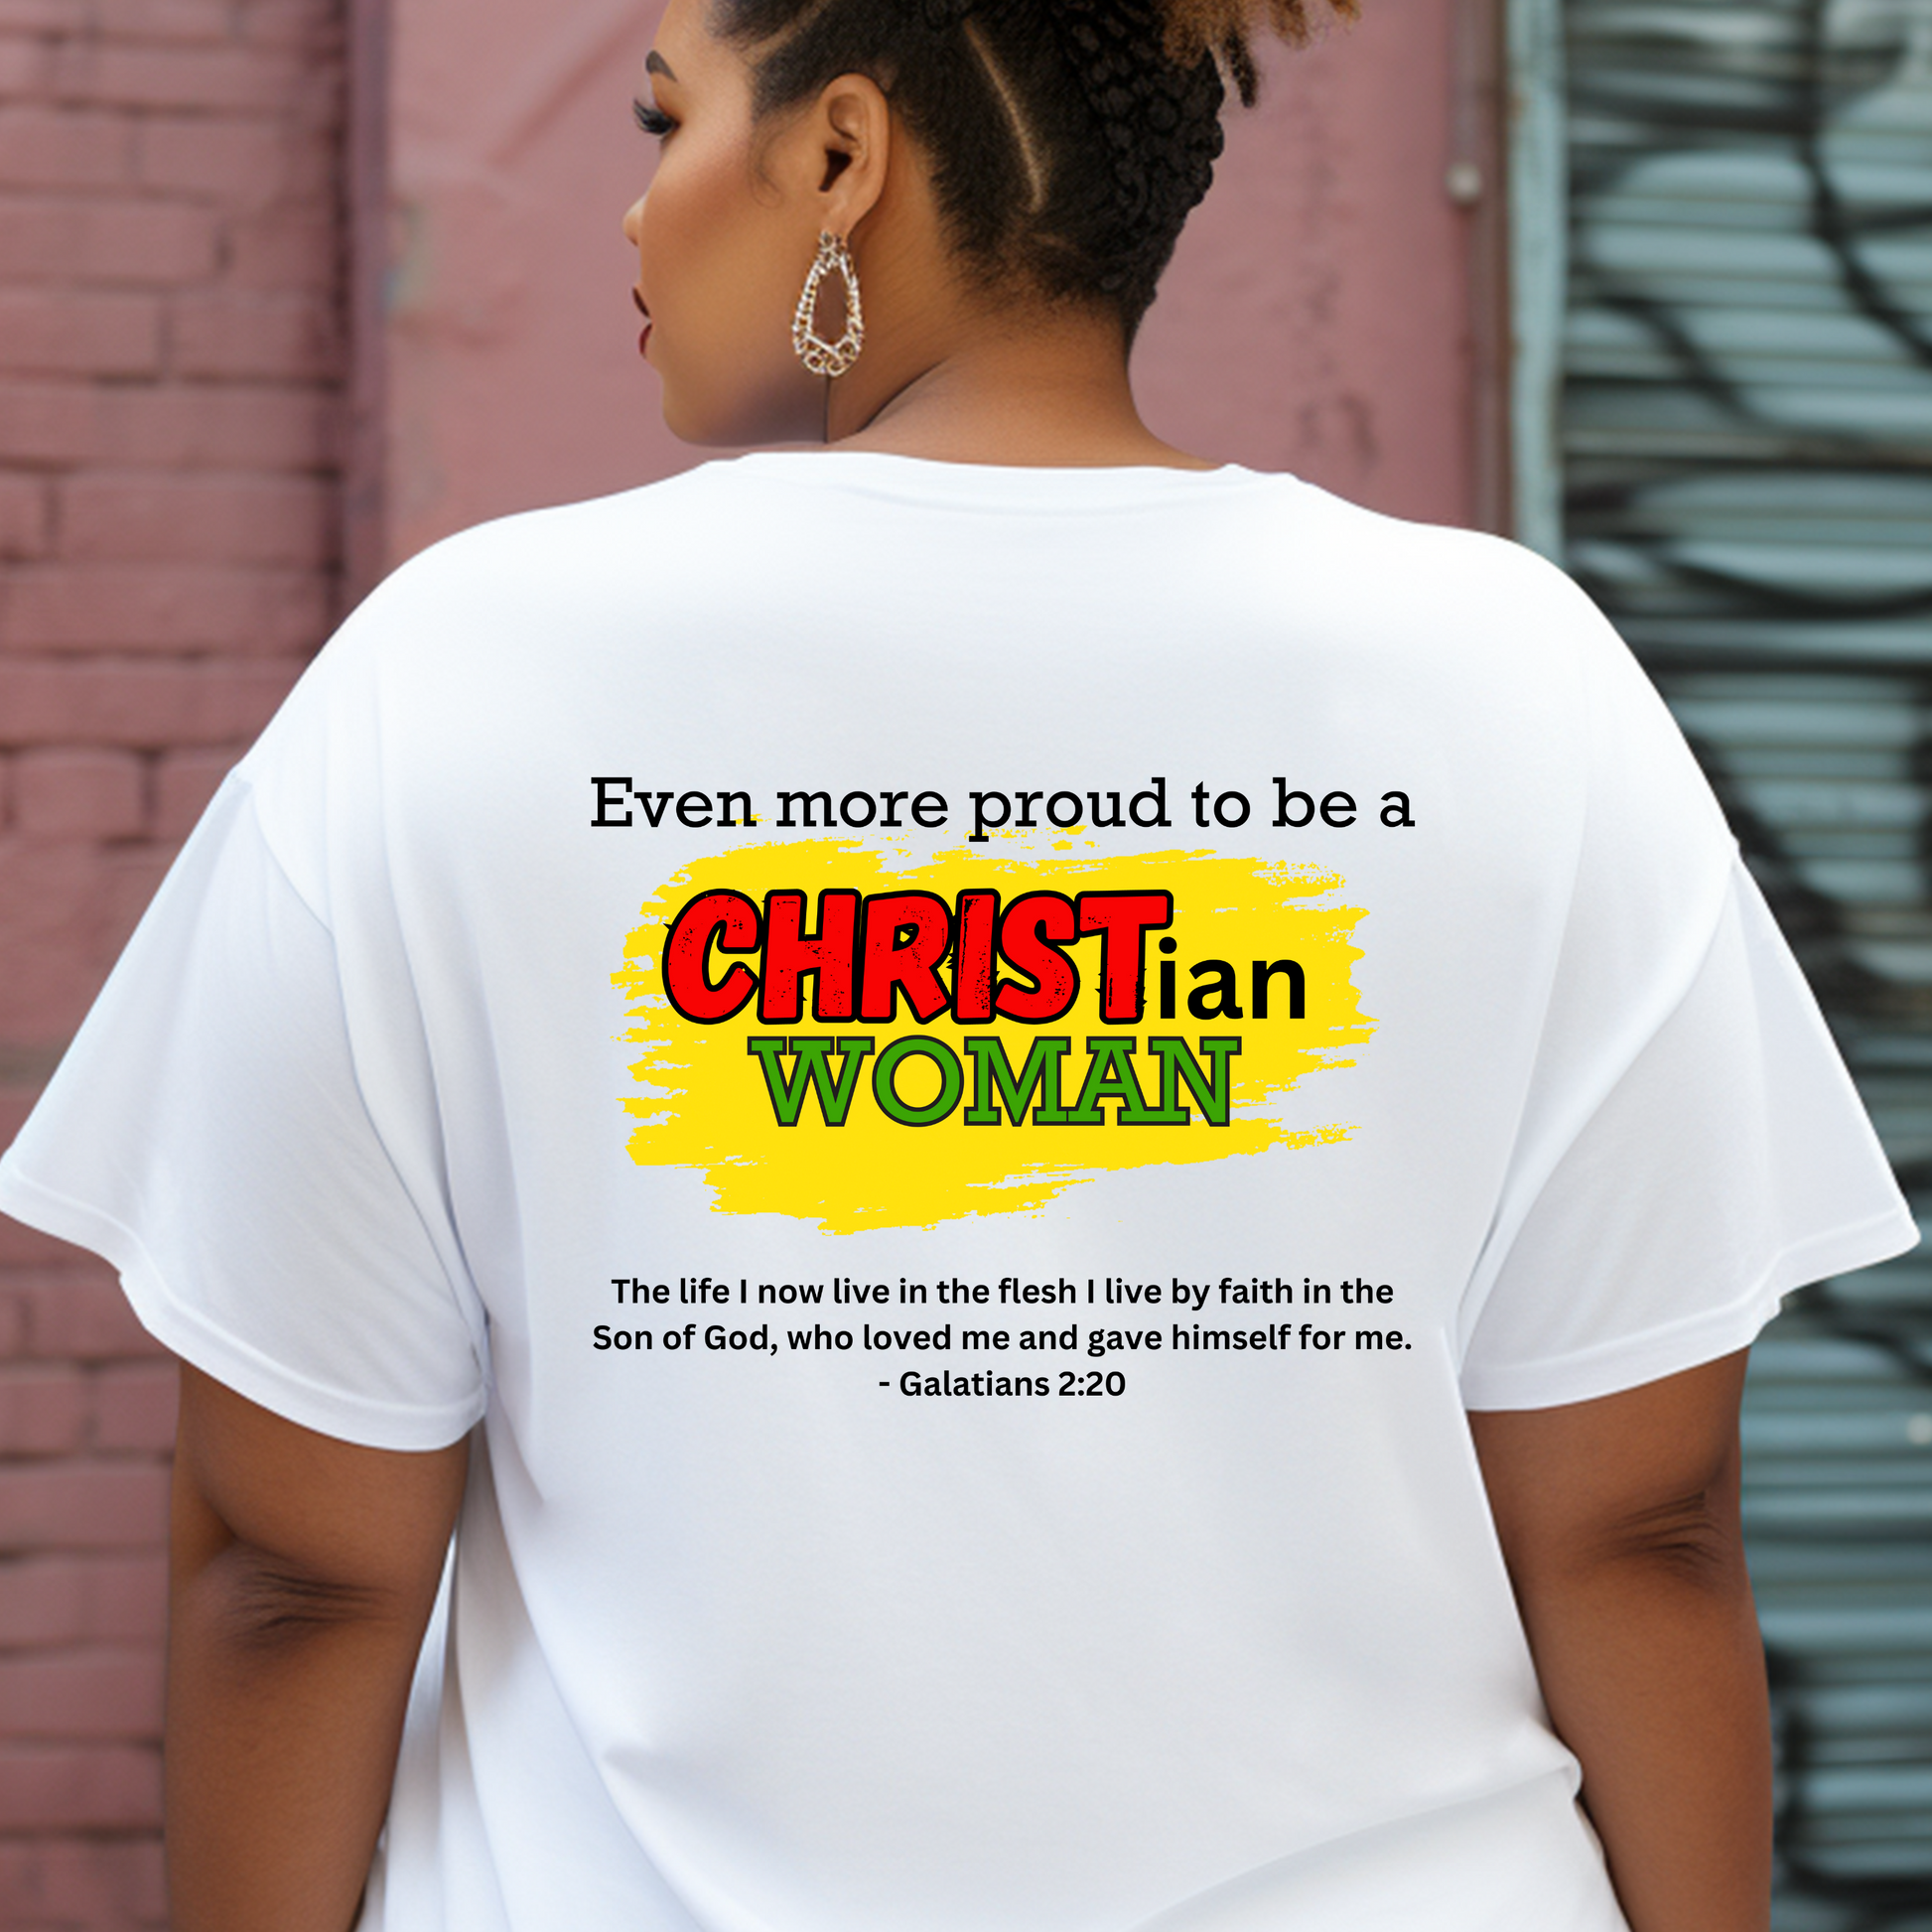 Shop for our empowering "Proud to be a Black Christian Woman" t-shirt, a stylish white tee that celebrates the intersection of Black History and faith. This statement piece allows you to make a bold and confident statement in your fashion choices. 🖤✝️ #BlackChristianWoman #FaithFashion #BlackHistoryFashion